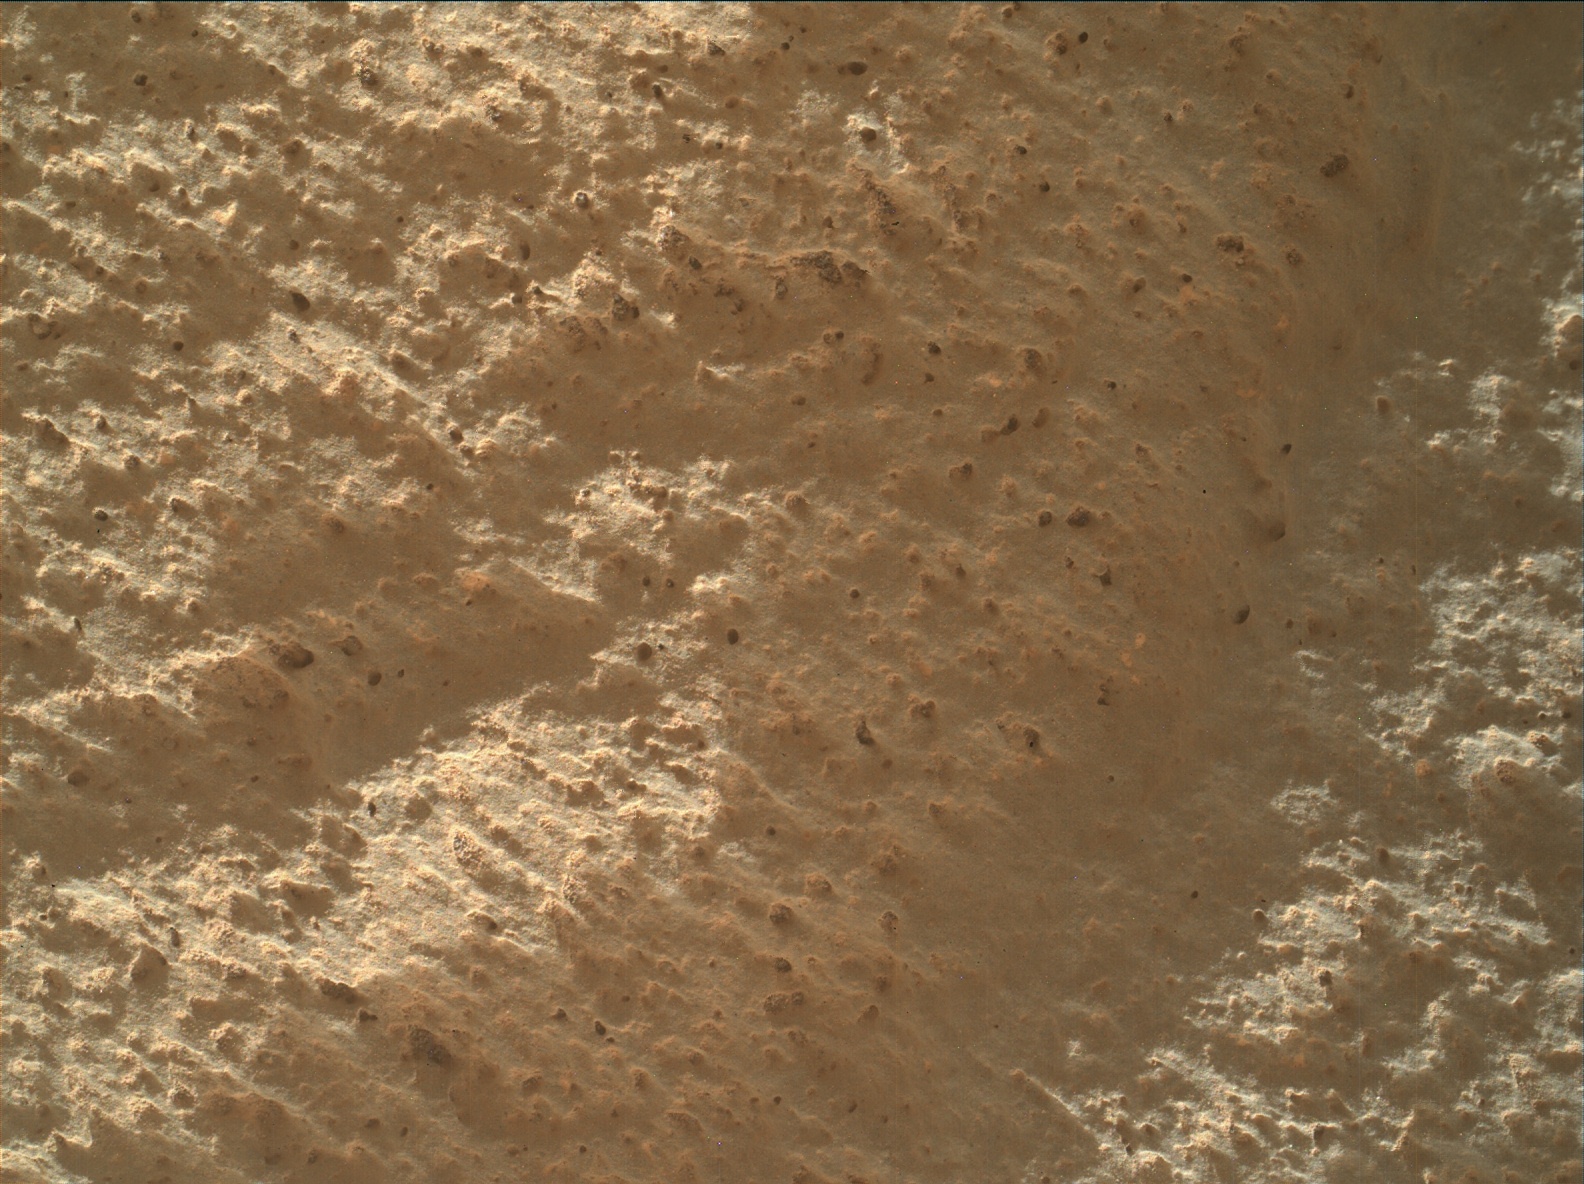 Nasa's Mars rover Curiosity acquired this image using its Mars Hand Lens Imager (MAHLI) on Sol 3429